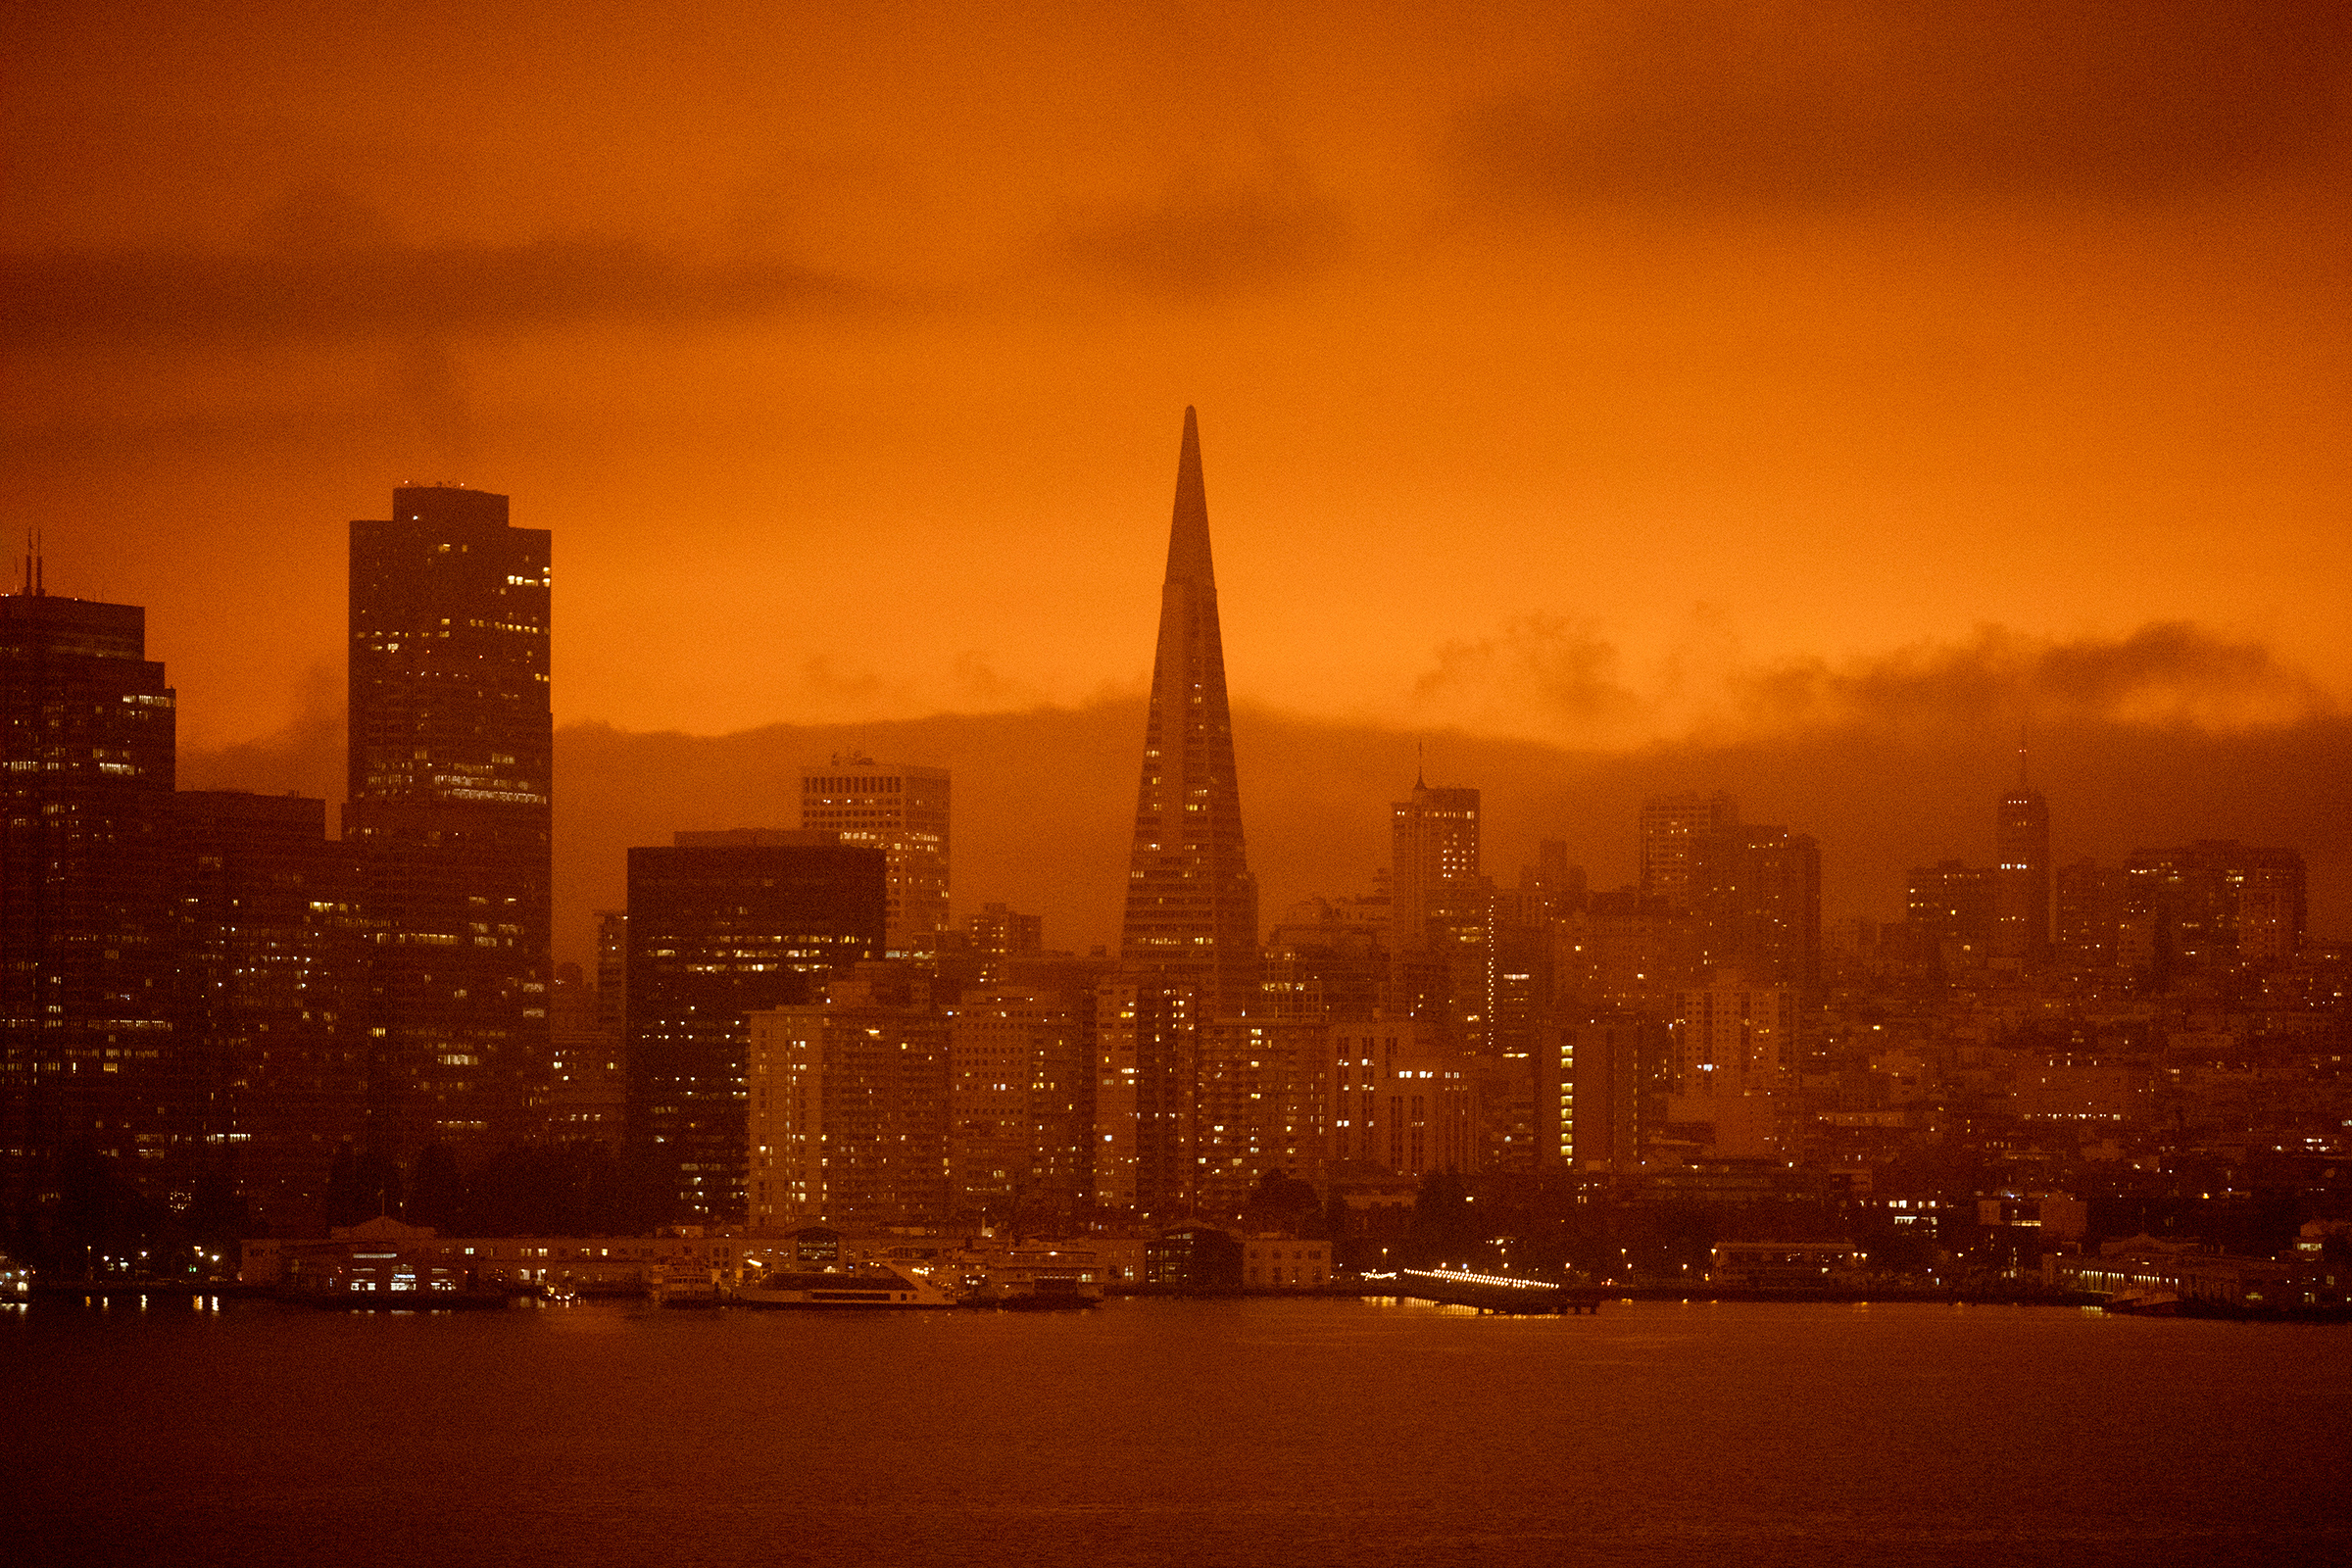 Dark orange skies hang over the San Francisco skyline, as seen from Treasure Island, on Sept. 9, due to multiple wildfires burning across California and Oregon. (Jessica Christian—The San Francisco Chronicle/Getty Images)